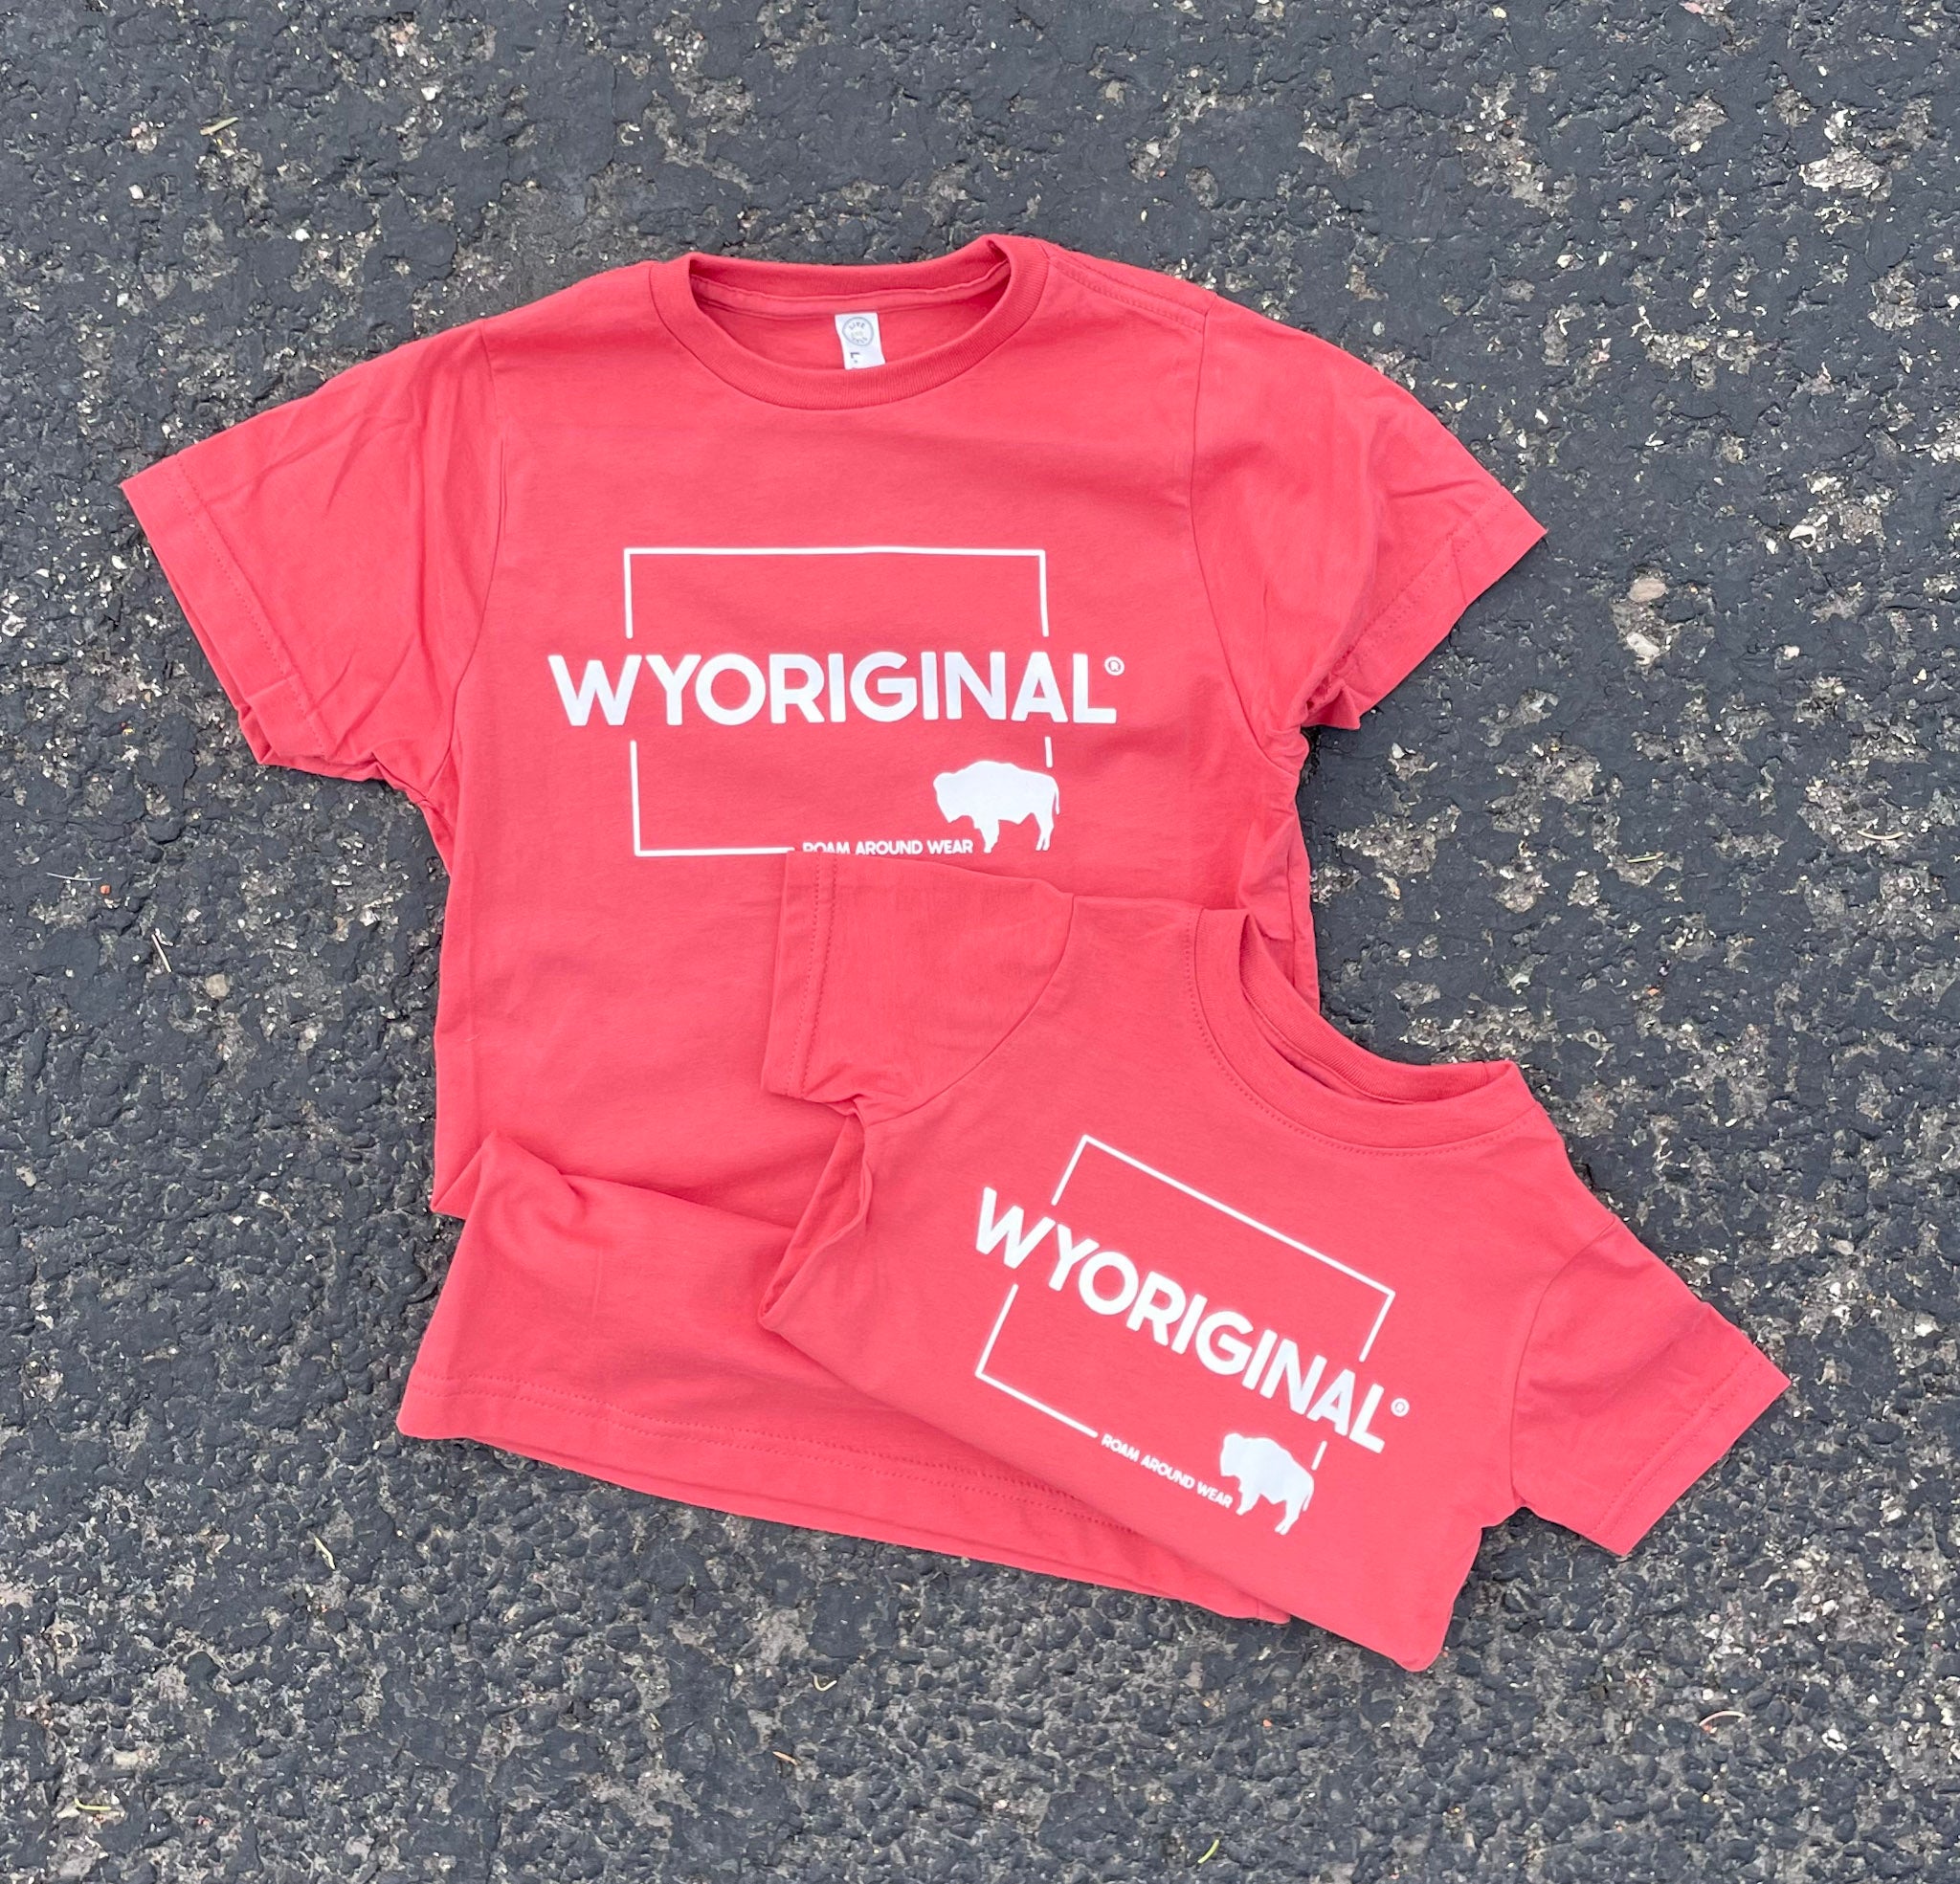 WYORIGINAL® Square State Toddler/Youth T-Shirt | Wear will you roam today? Roam Around Wear is a t-shirt company based in Wyoming